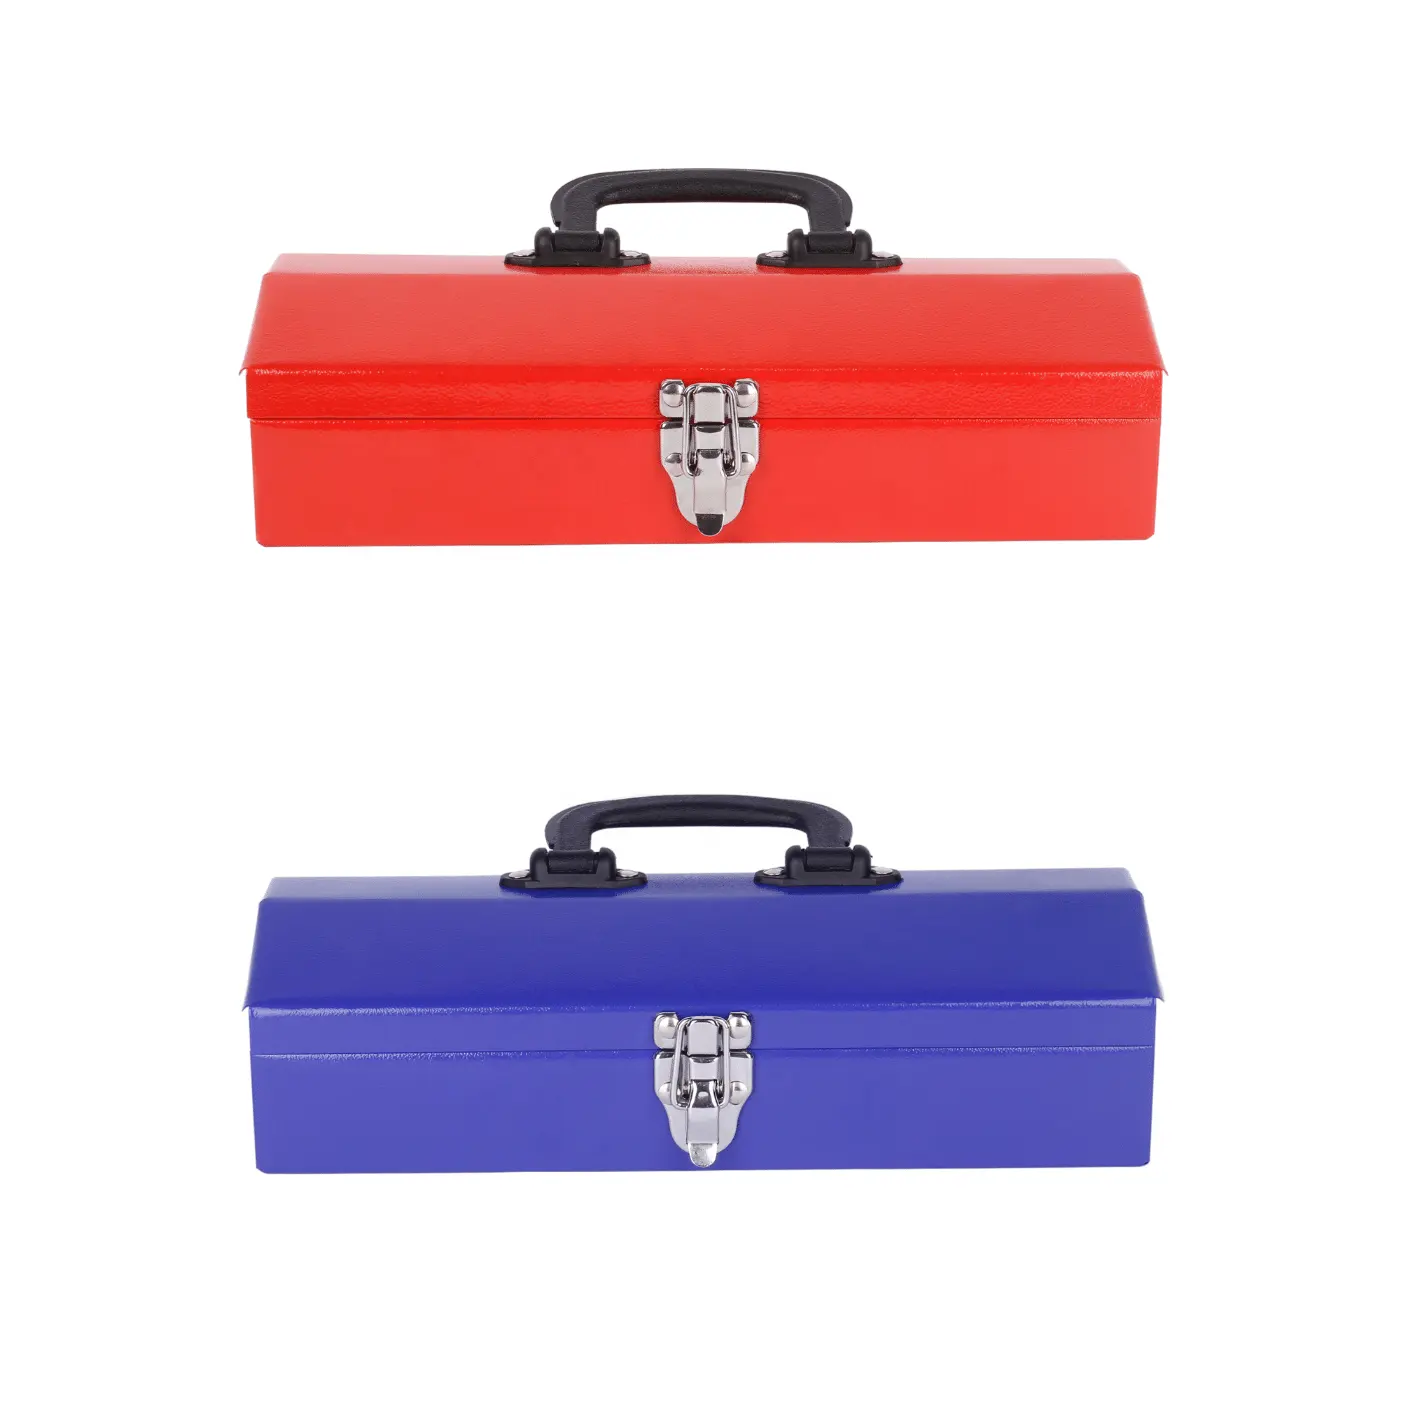 Big Red & Blue Hip Roof Style Portable Steel Tool Box with Metal Latch Closure